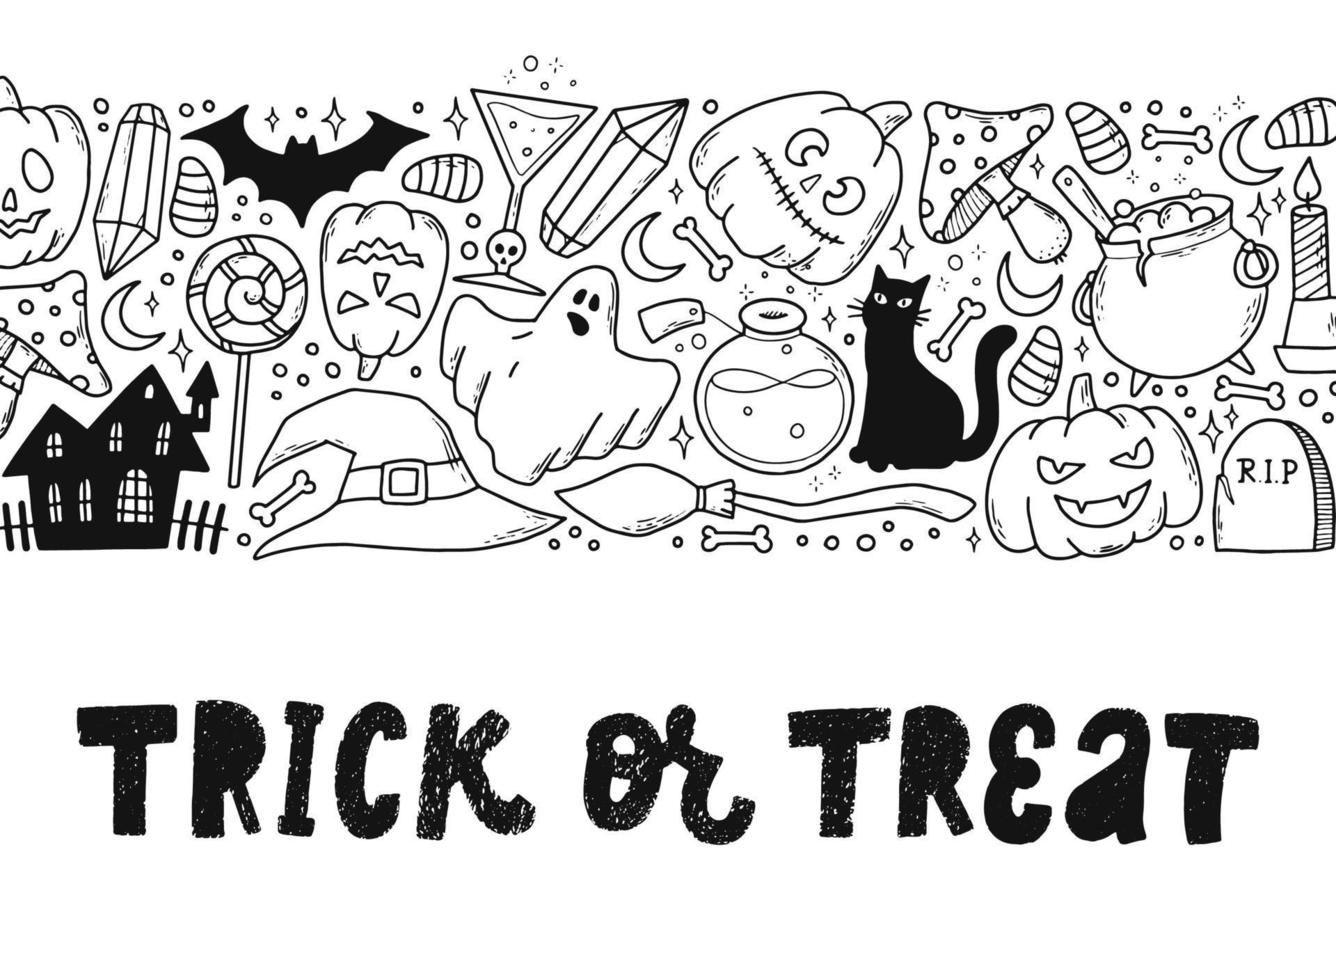 Halloween banner with lettering quote 'Trick or treat' and horizontal border of sketched doodles. Good for templates, cards, invitations, posters with copy space, coloring pages, etc. EPS 10 vector